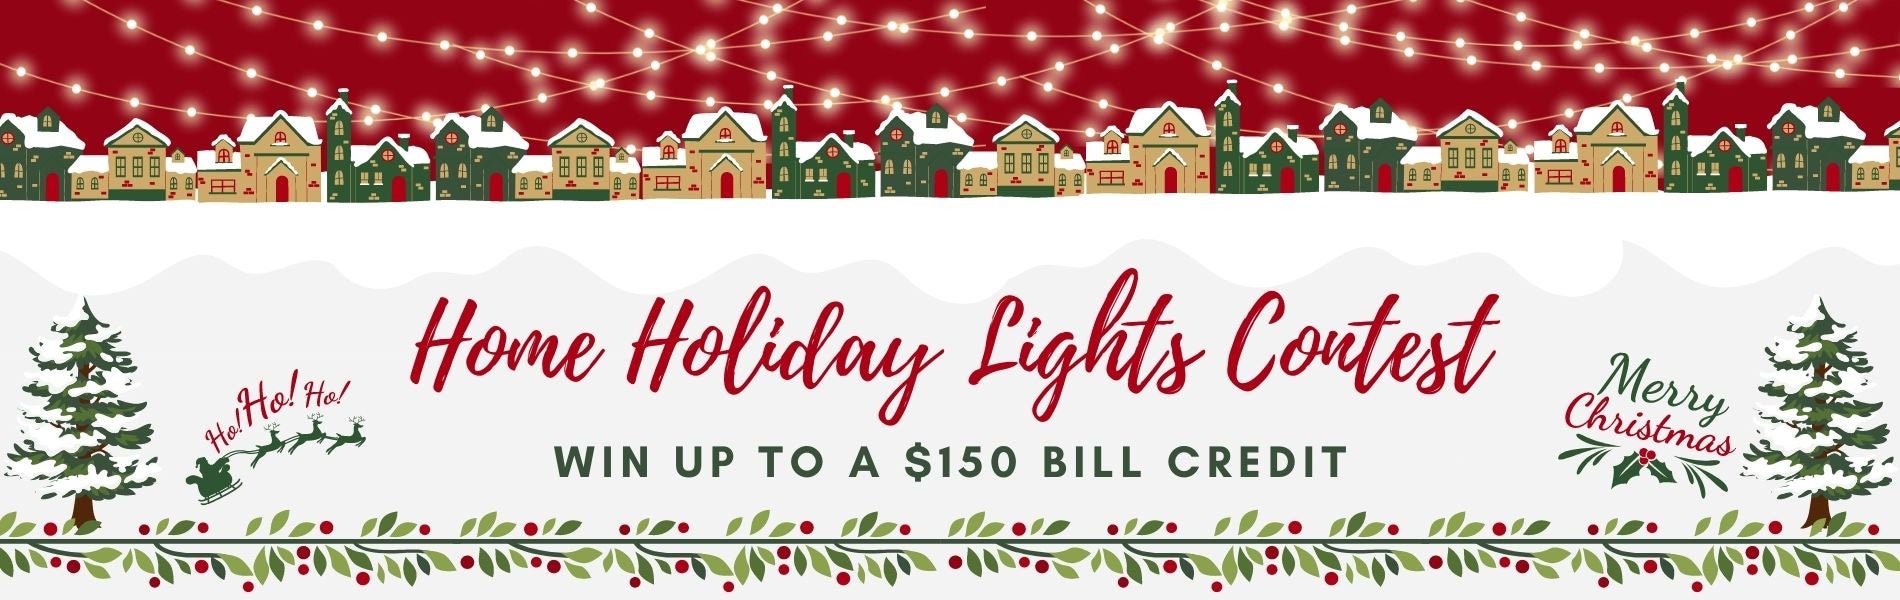 Win up to a $150 bill credit with Central's Home Holiday Lights competition.